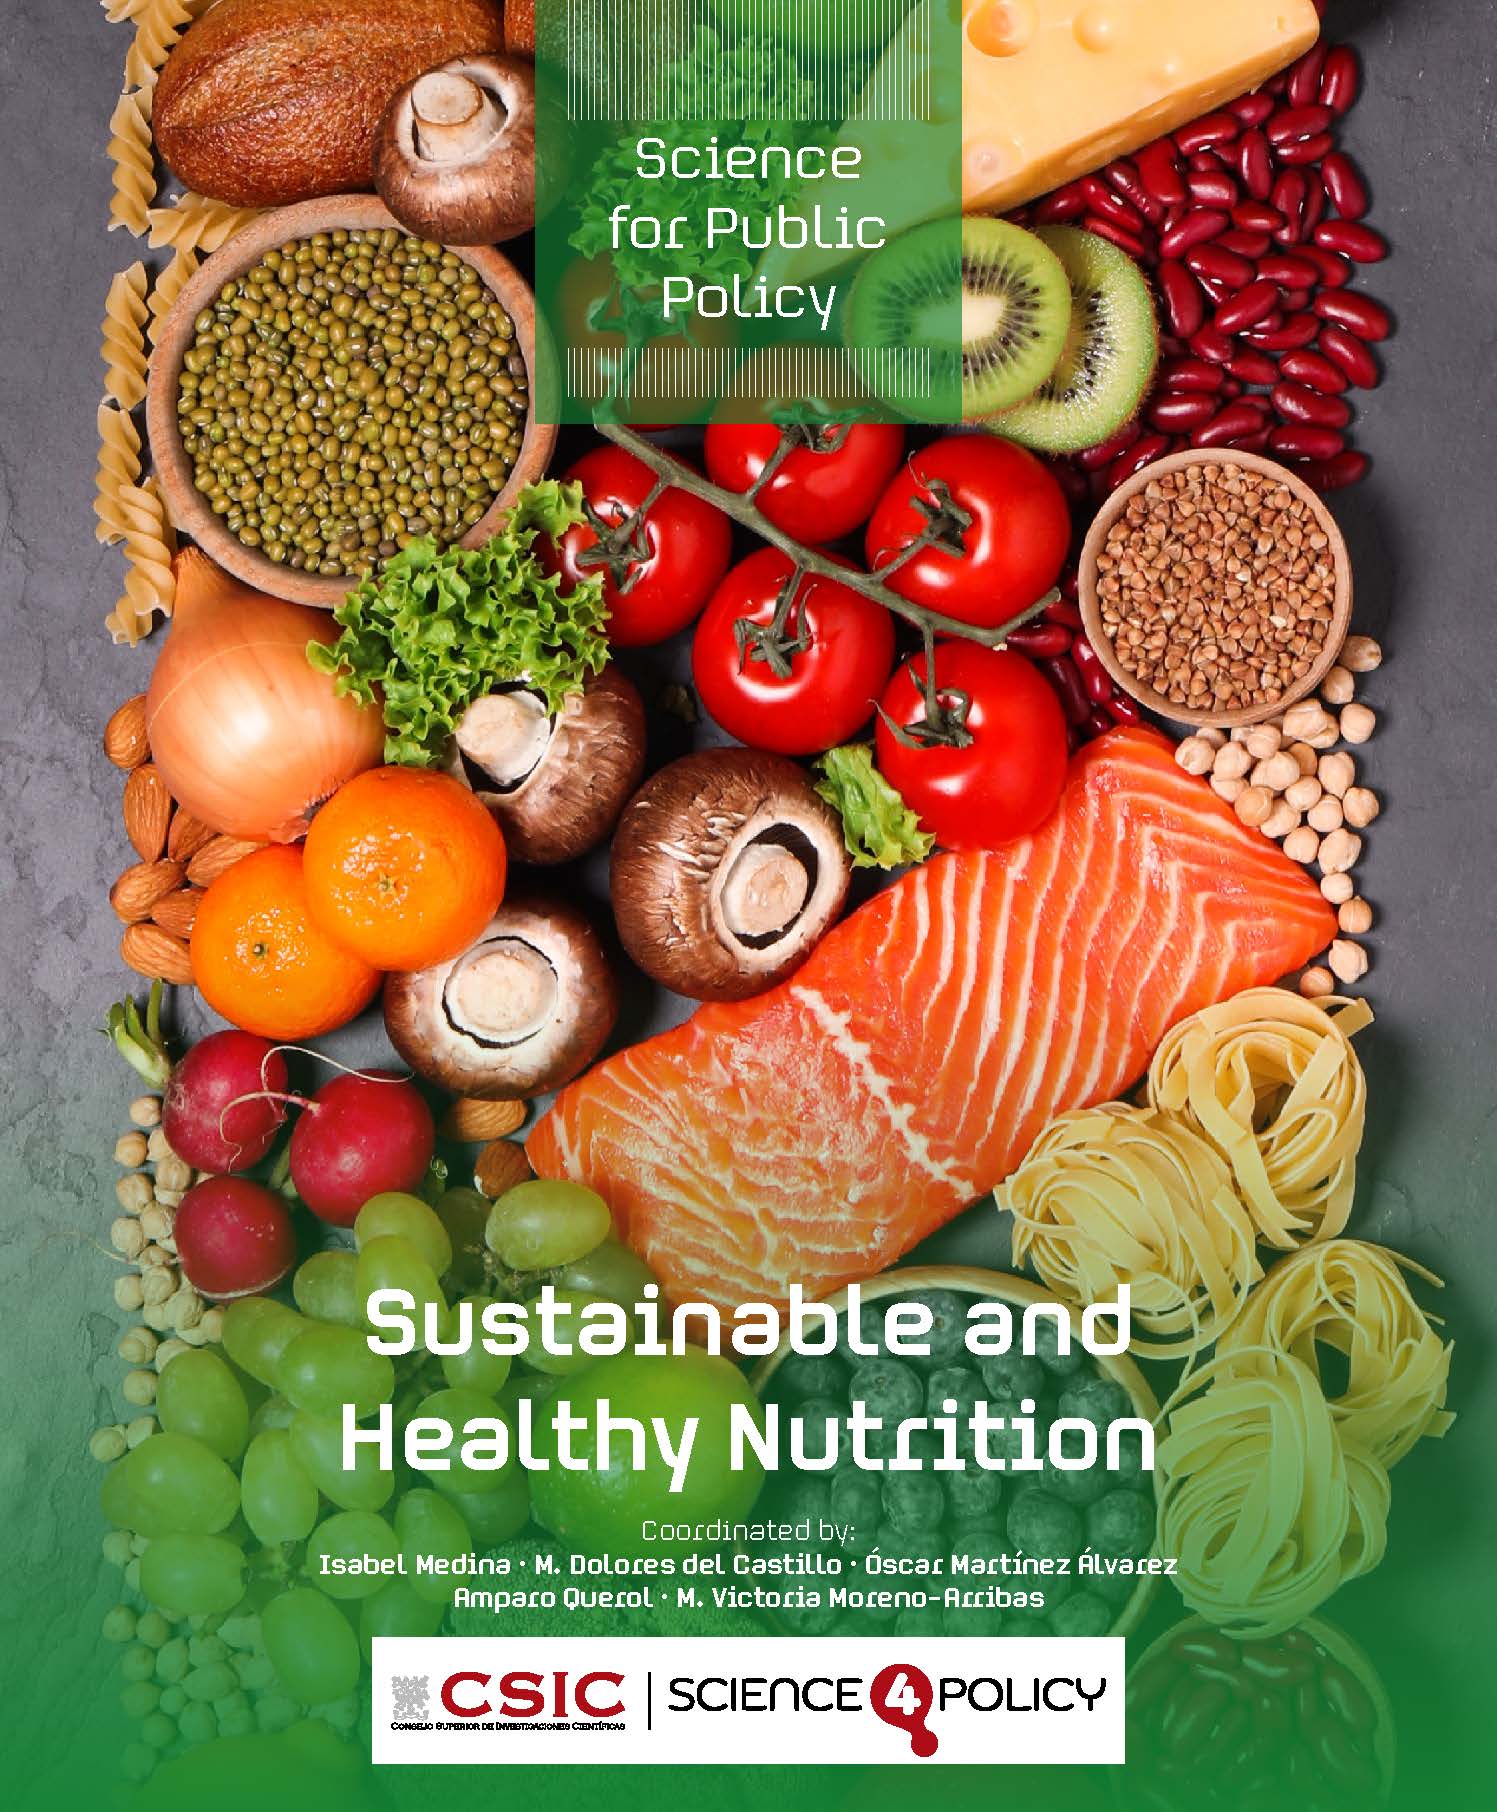 Sustainable and healthy nutrition